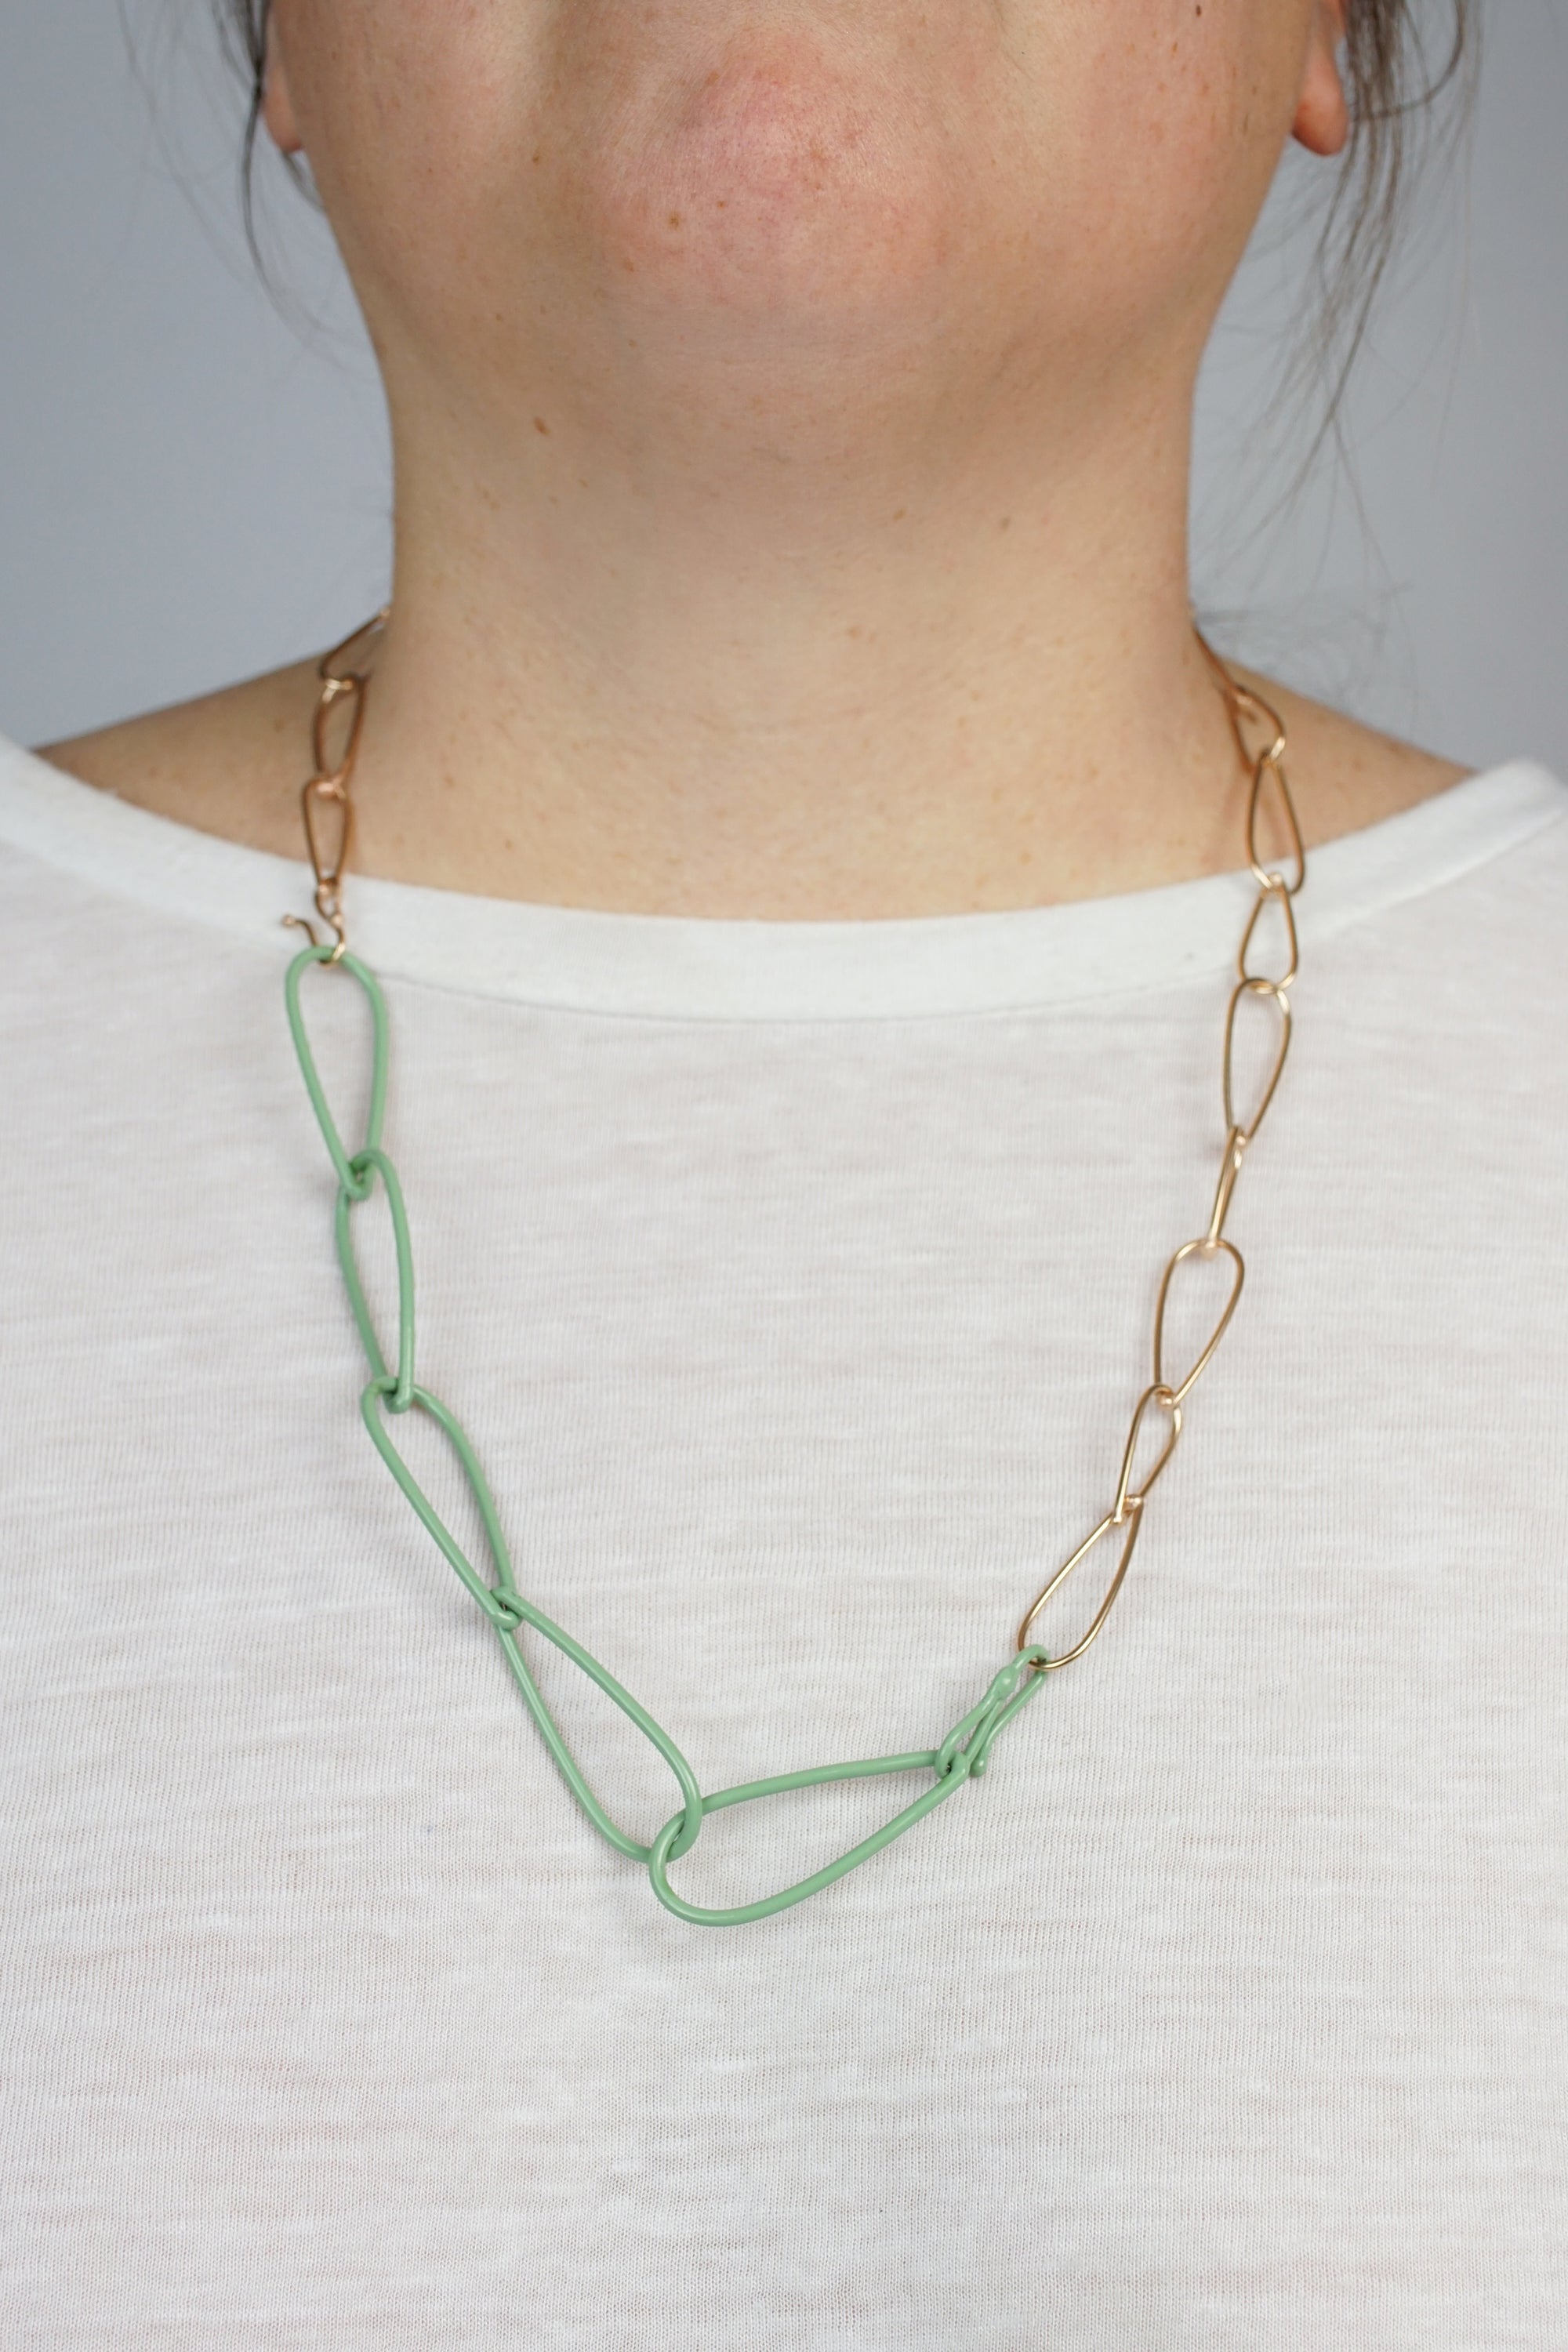 Modular Necklace in Bronze and Pale Green